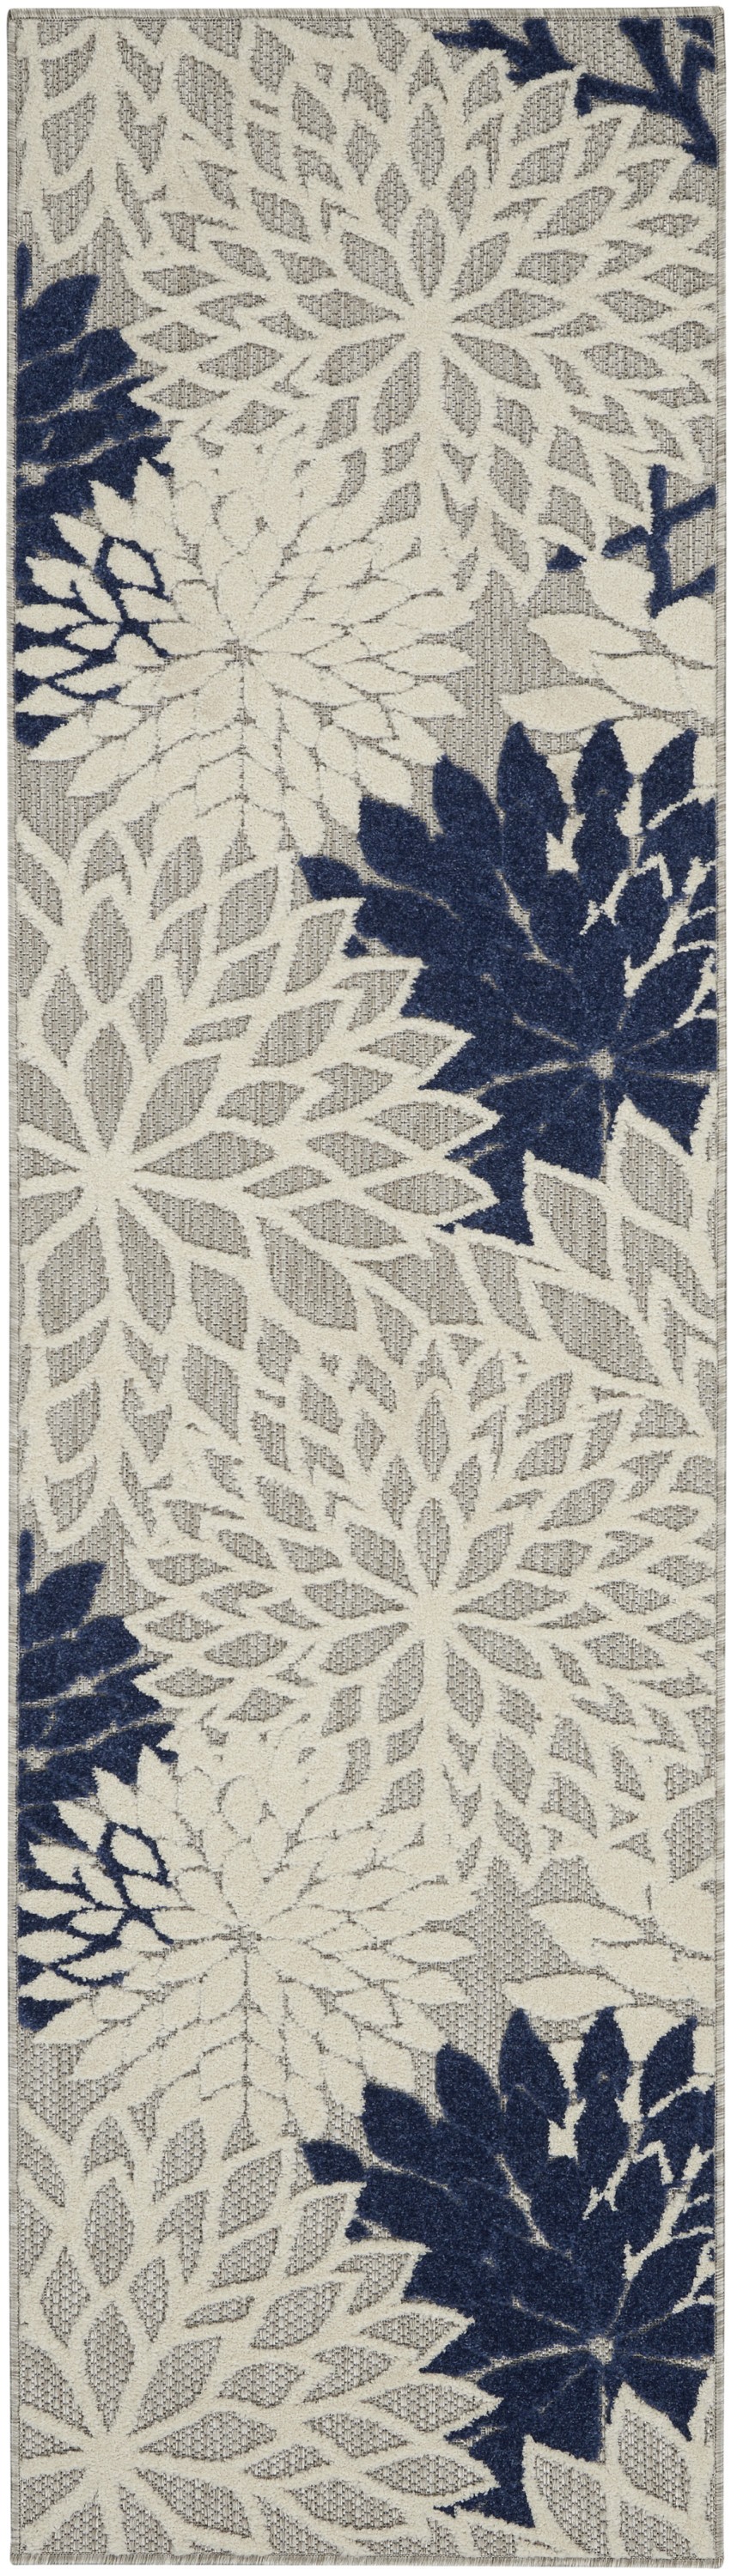 2' X 8' Ivory And Blue Floral Indoor Outdoor Area Rug-384829-1